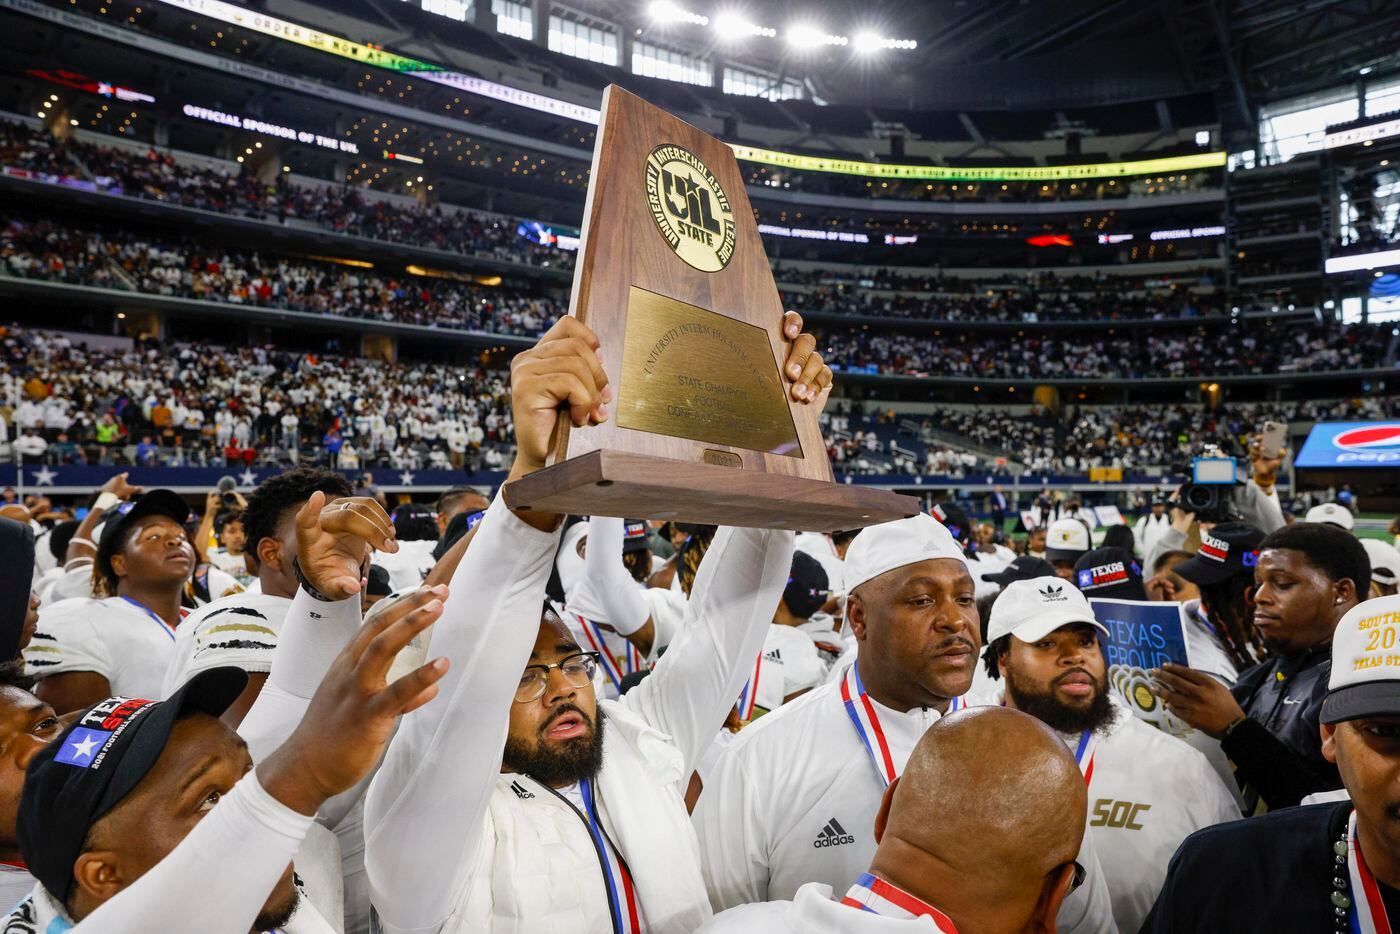 South Oak Cliff assistant coach Domenic Spencer raises the championship trophy after the Class 5A Division II state championship game at AT&T Stadium in Arlington, Saturday, Dec. 18, 2021. South Oak Cliff defeated Liberty Hill 23-14 for Dallas ISD’s first title since 1958. (Elias Valverde II/The Dallas Morning News)